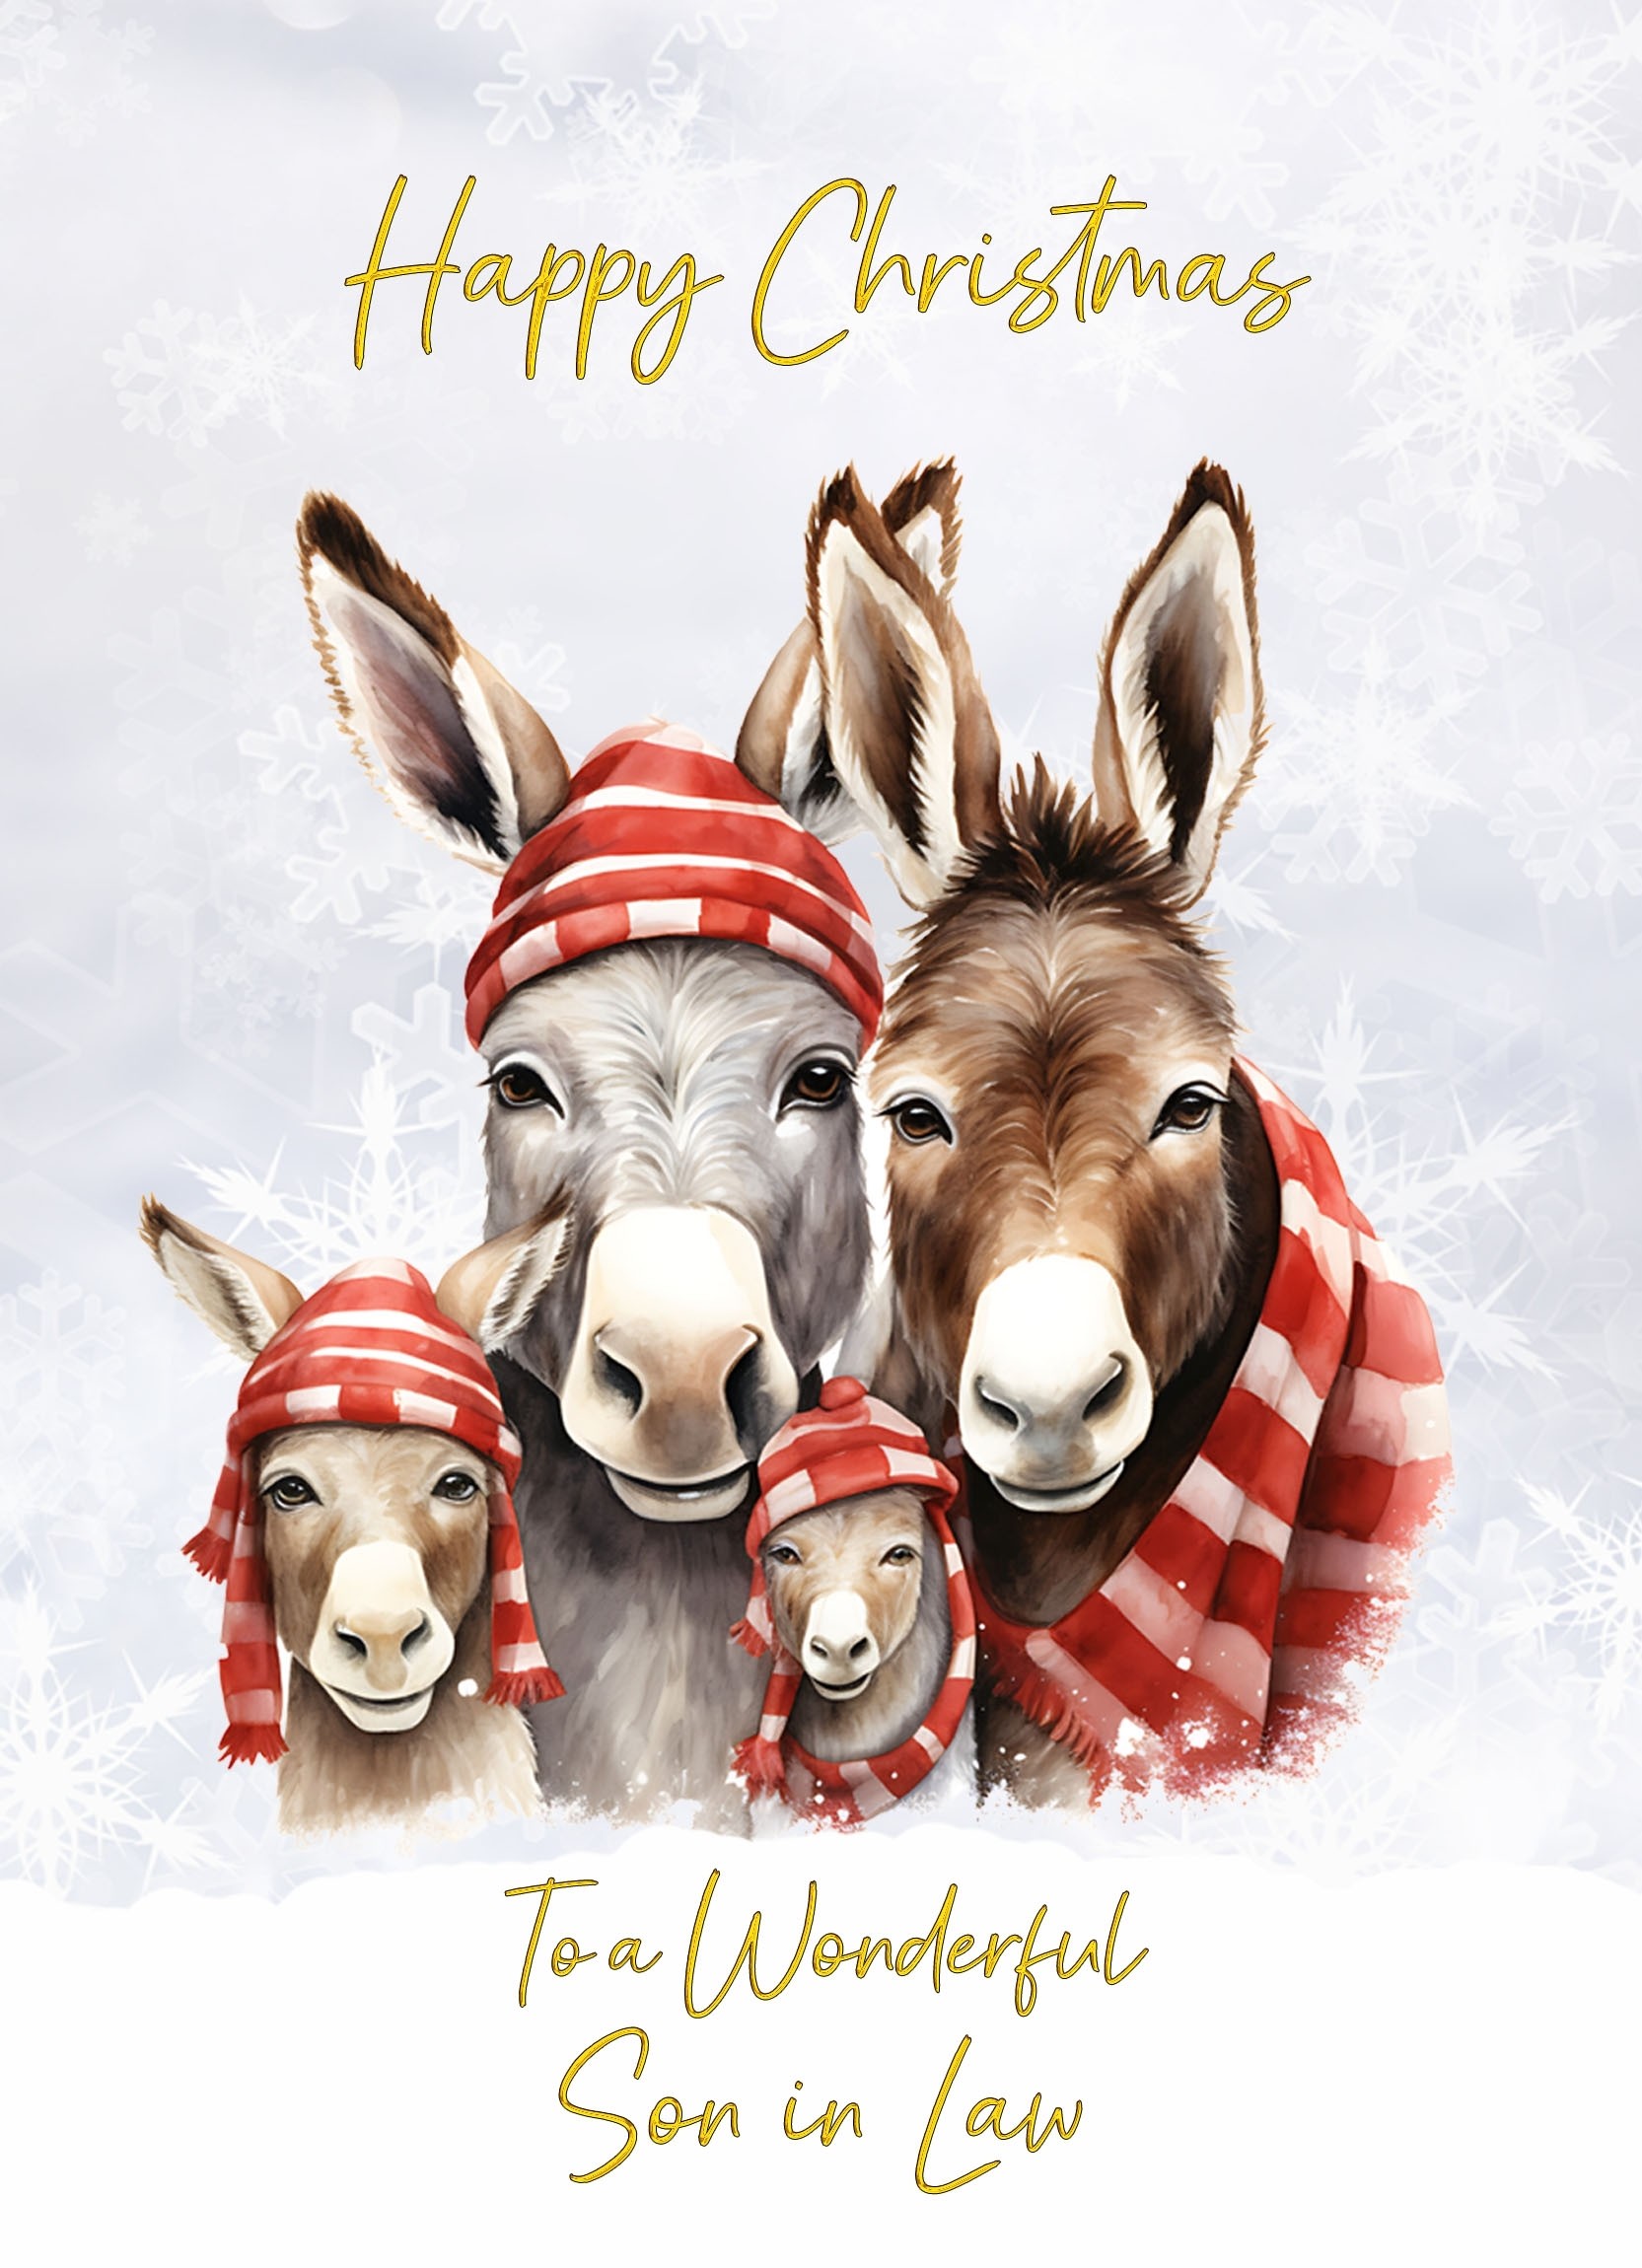 Christmas Card For Son in Law (Donkey Family Art)